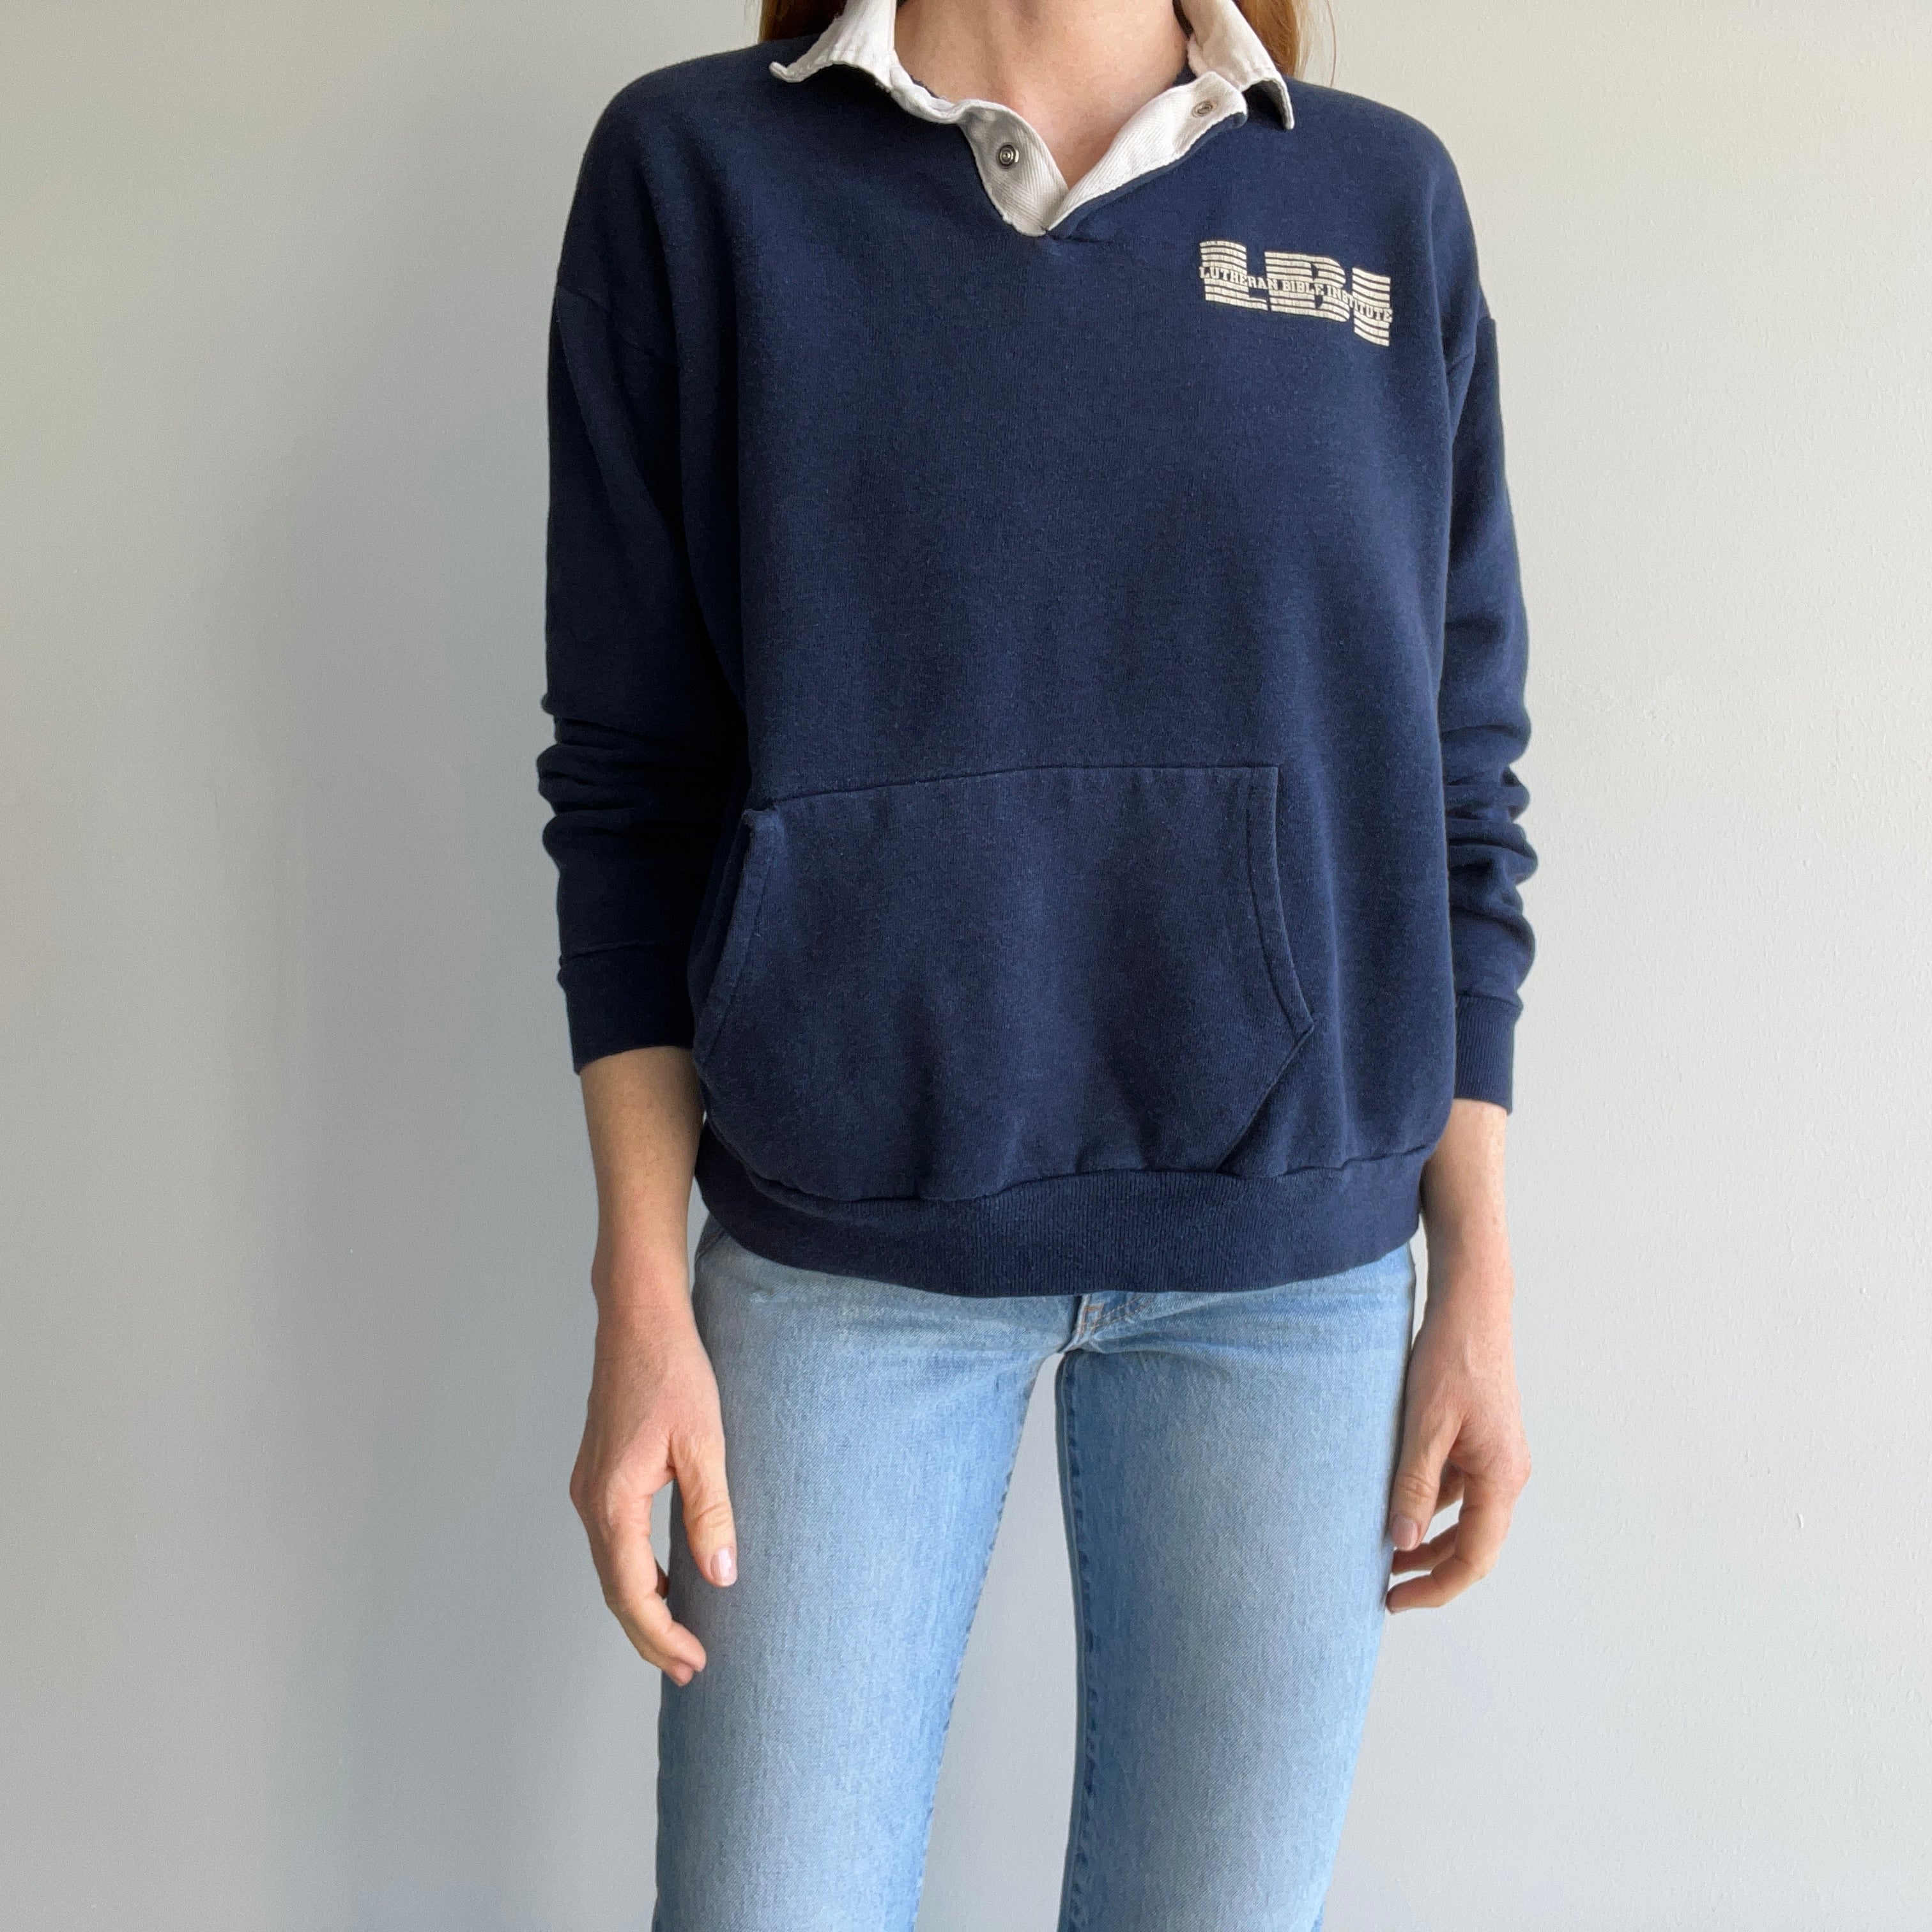 1970/80s Lutheran Bible Institute Polo Sweatshirt by Collegiate Pacific